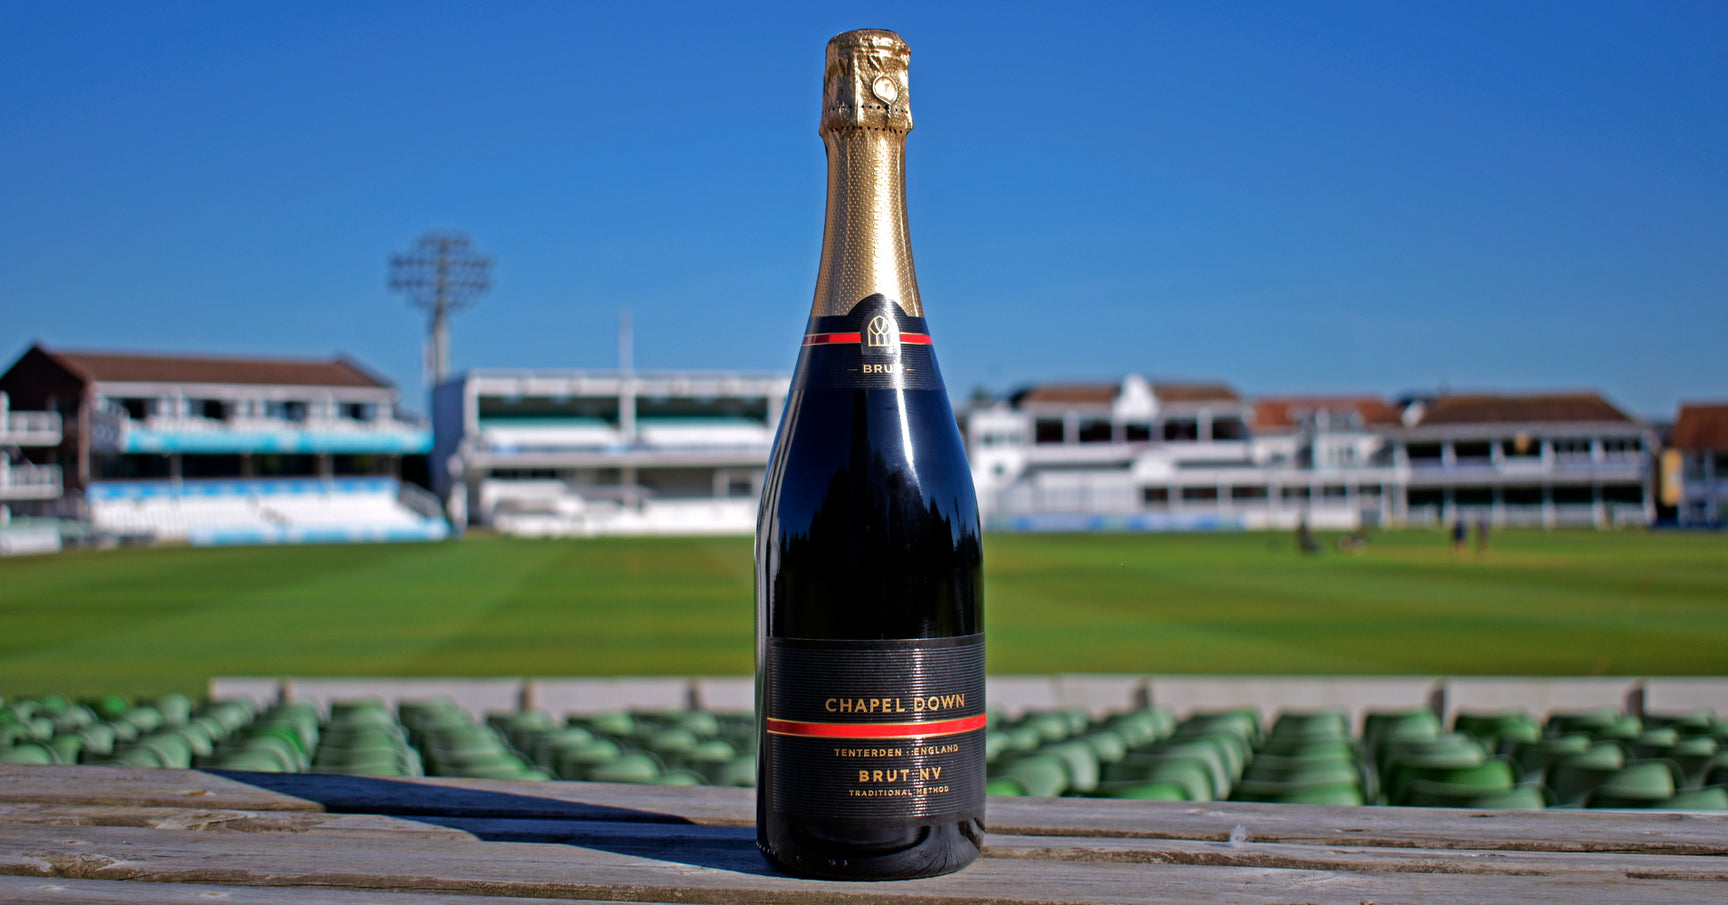 Introducing our latest partnership with Kent Cricket